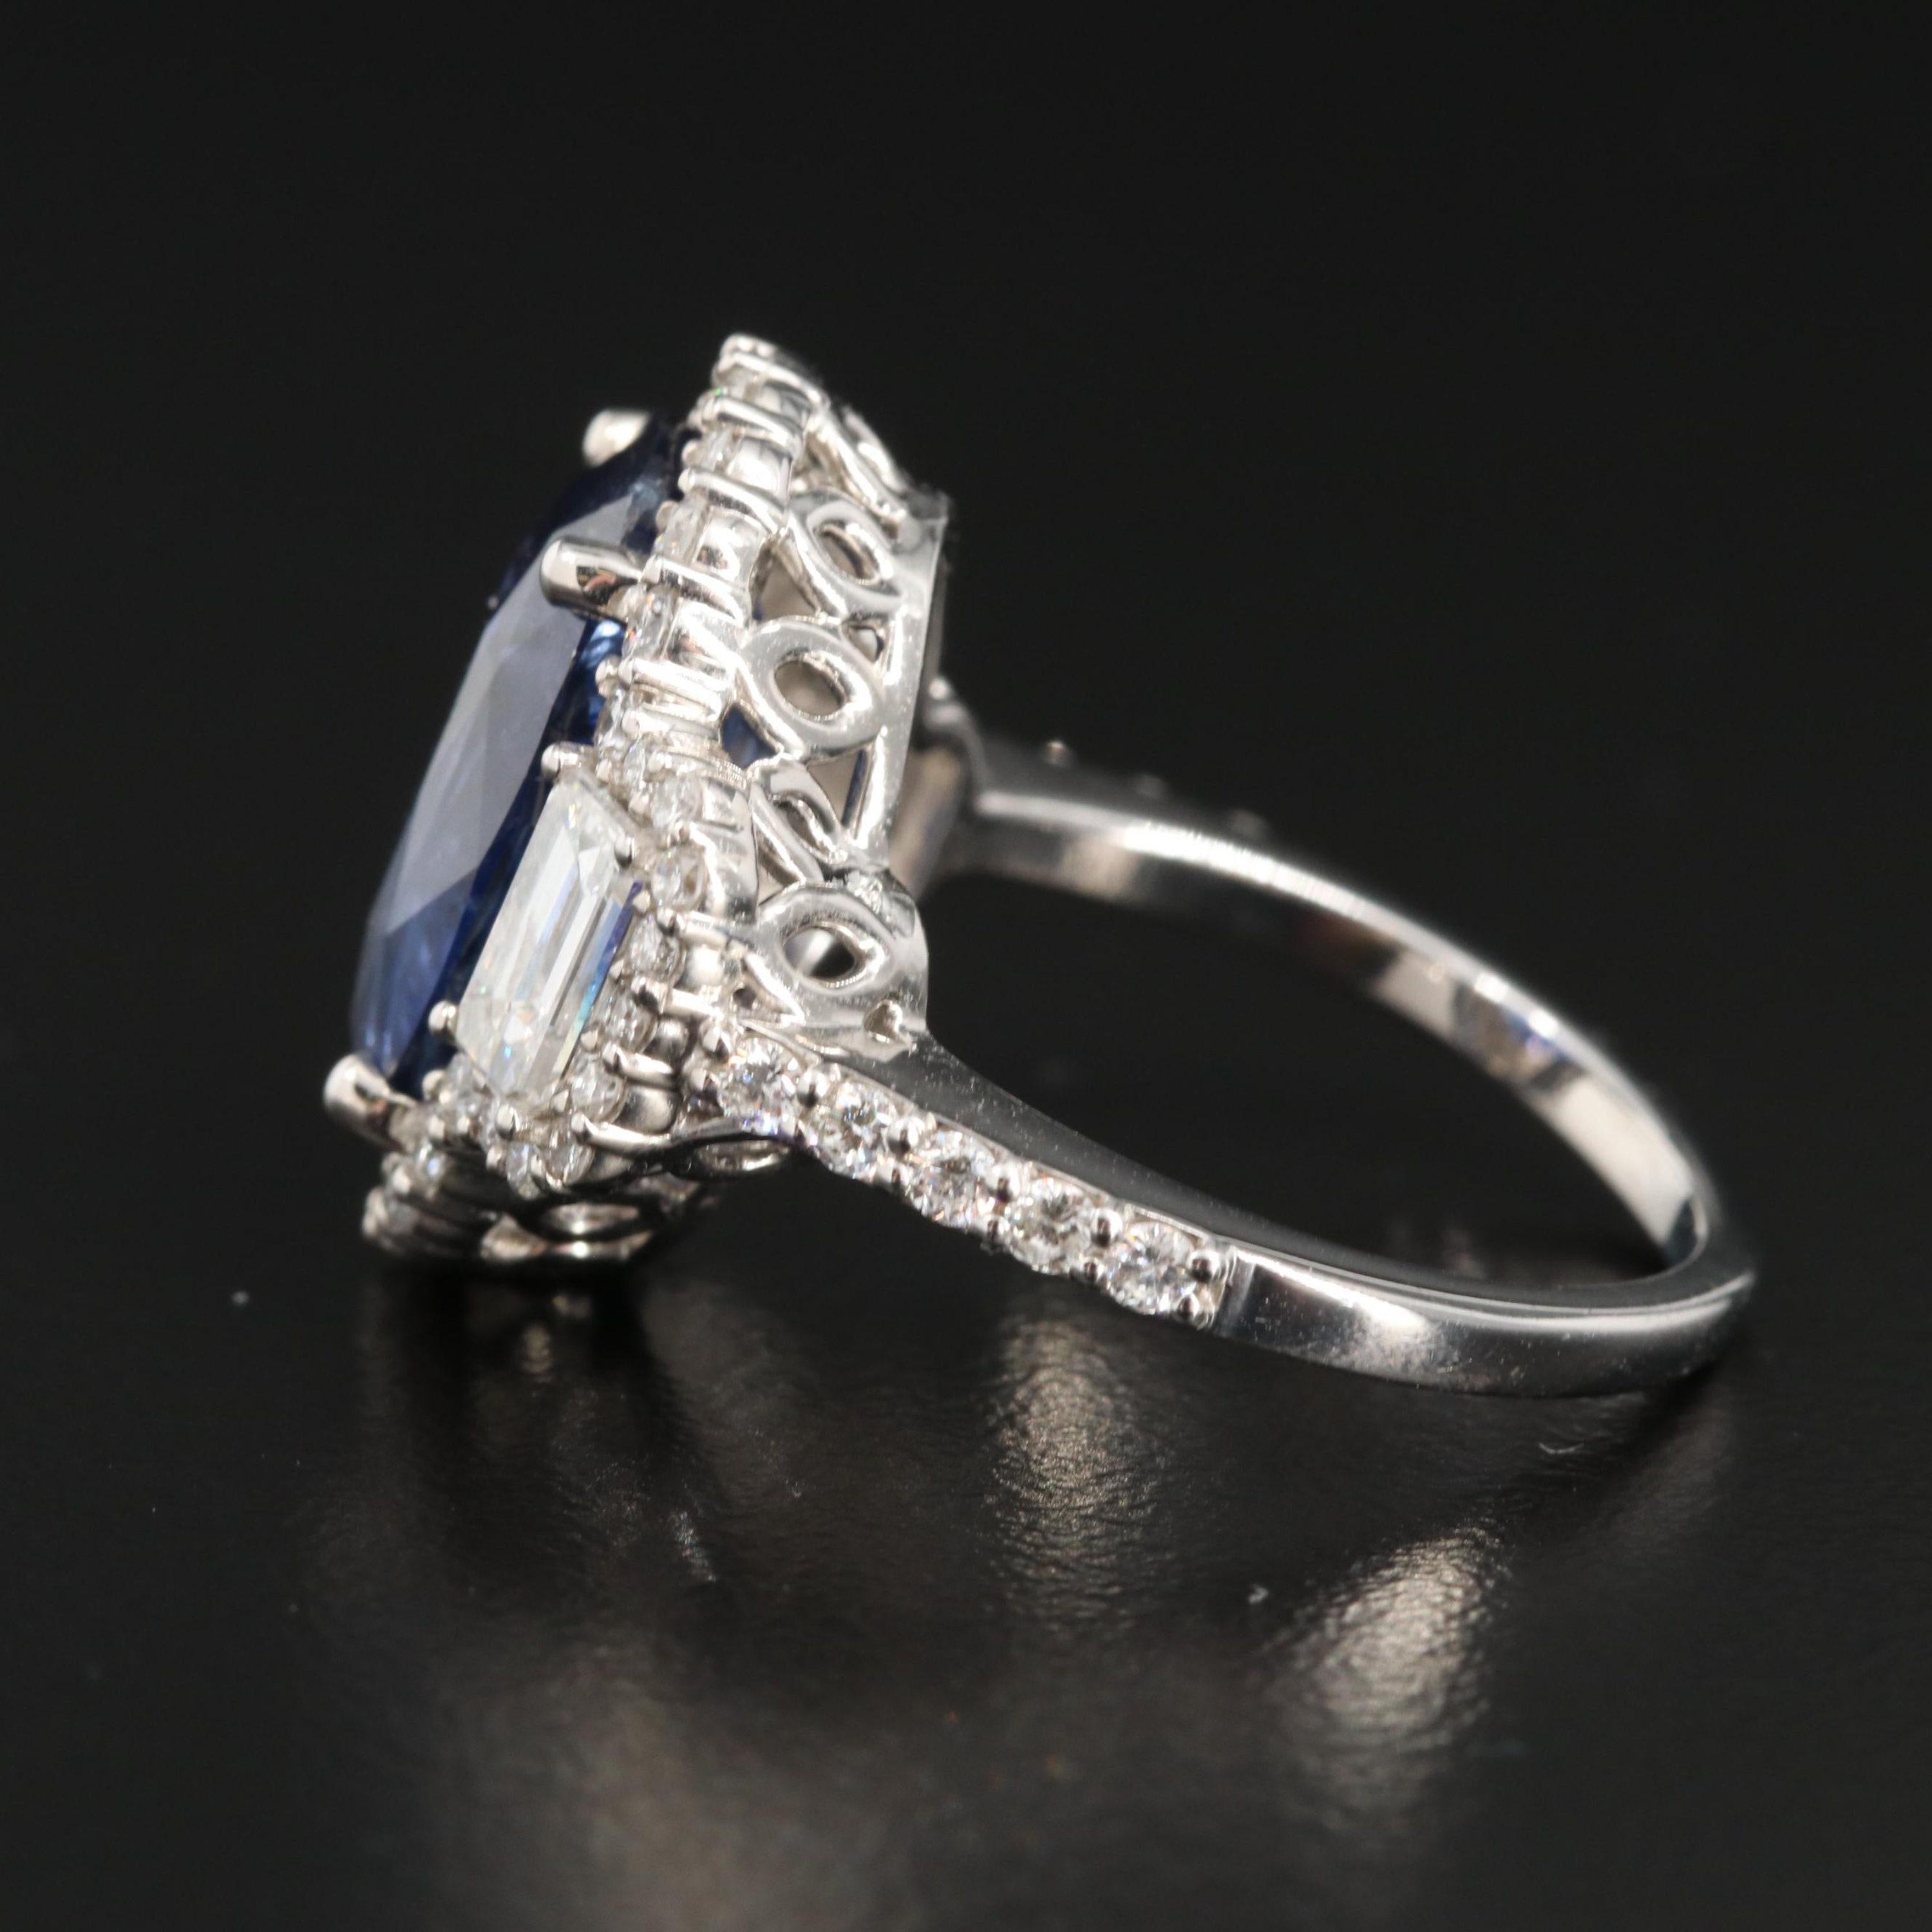 For Sale:  5 Carat Natural Sapphire Diamond Engagement Ring Set in 18K Gold, Cocktail Ring 4